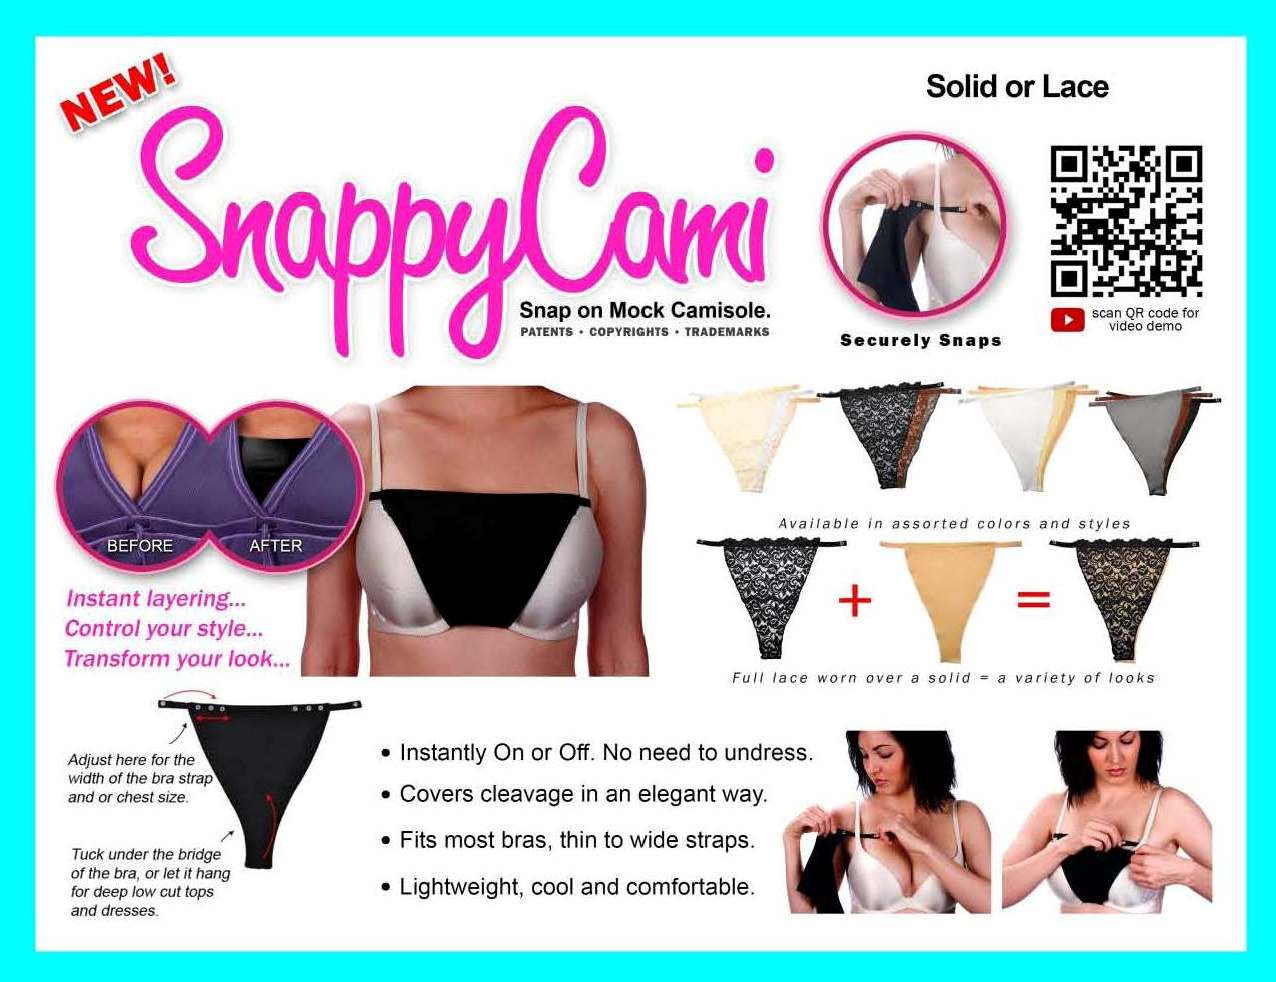 Snappy Cami - Snap on Mock Camisole